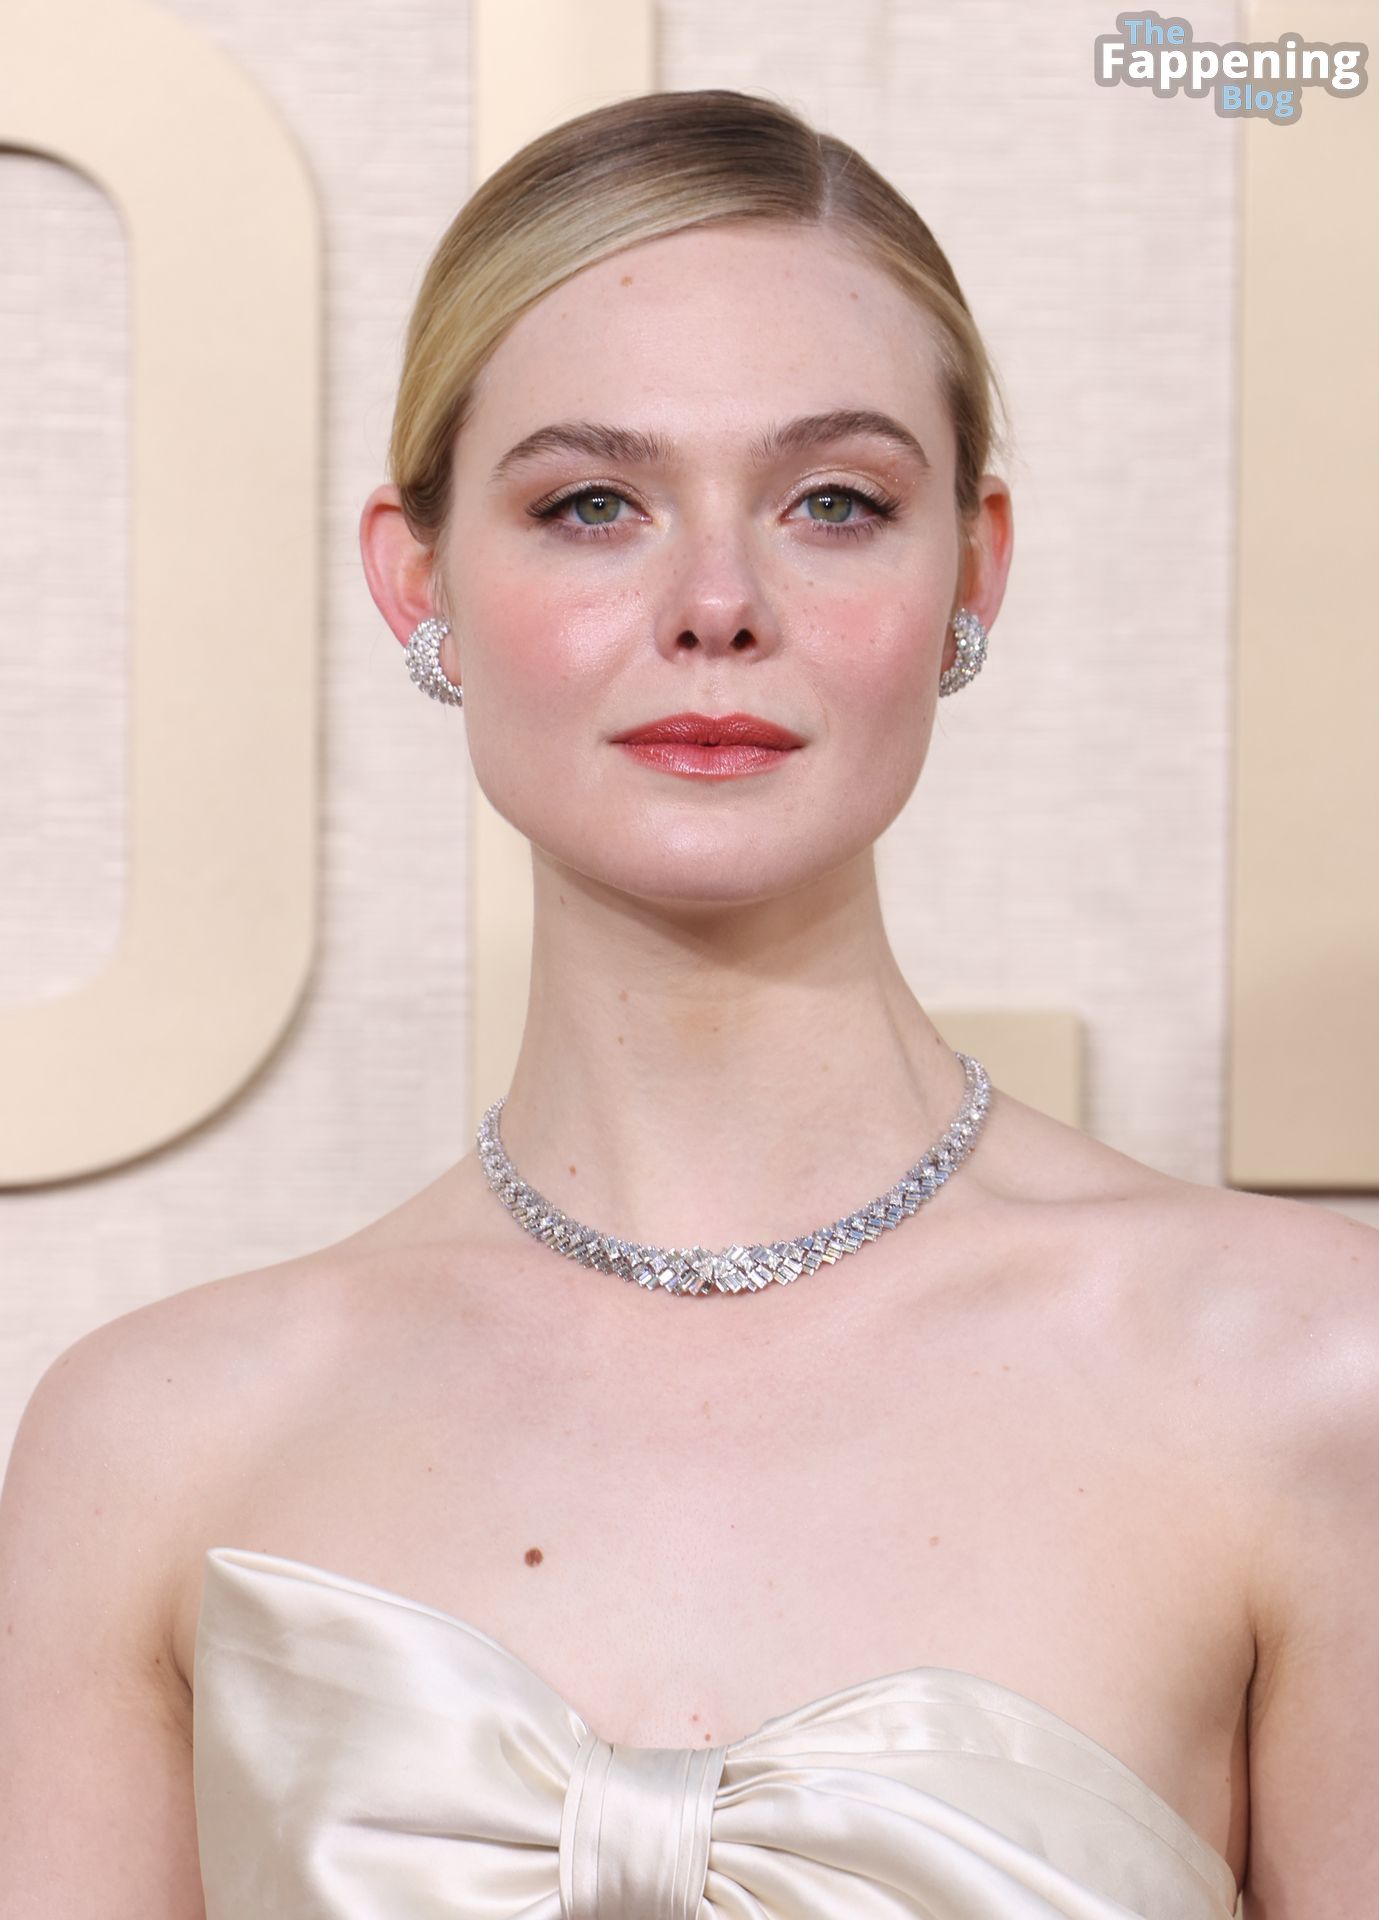 Elle-Fanning-Sexy-71-The-Fappening-Blog.jpg